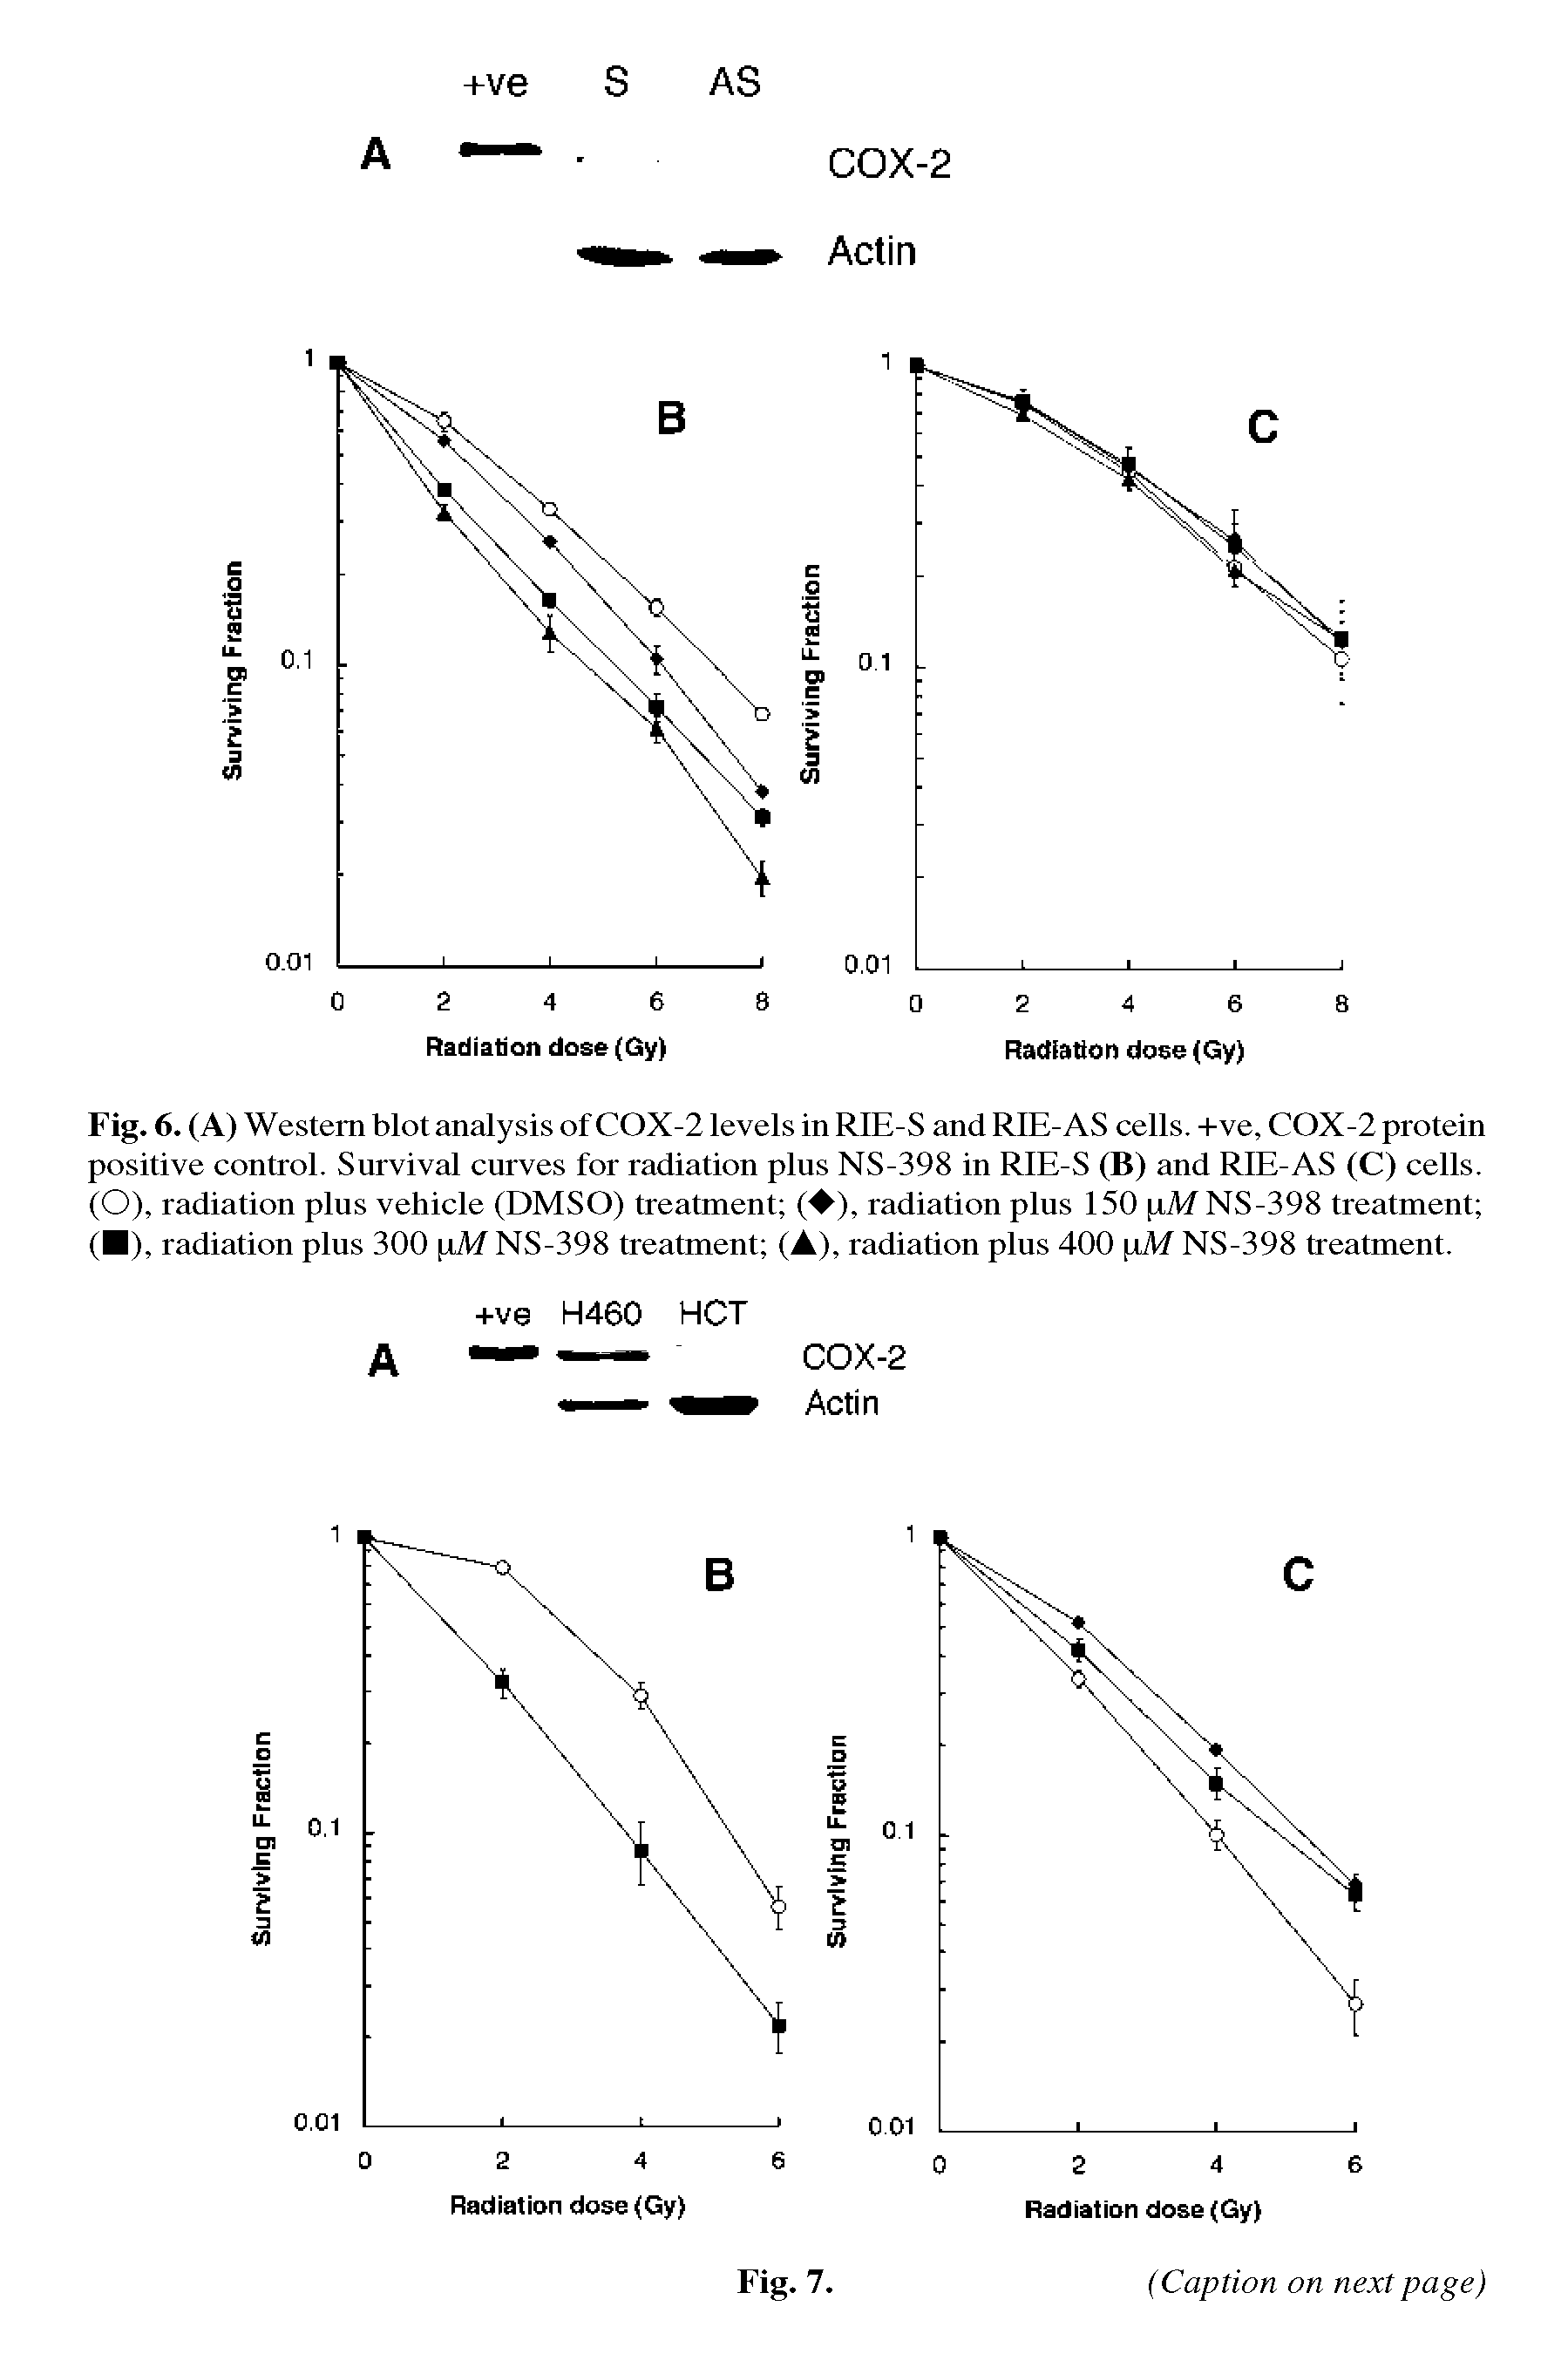 Fig. 6. (A) Western blot analysis of COX-2 levels in RIE-S and RIE-AS cells. +ve, COX-2 protein positive control. Survival curves for radiation plus NS-398 in RIE-S (B) and RIE-AS (C) cells. (O), radiation plus vehicle (DMSO) treatment ( ), radiation plus 150 pM NS-398 treatment ( ), radiation plus 300 pM NS-398 treatment (A), radiation plus 400 pM NS-398 treatment.